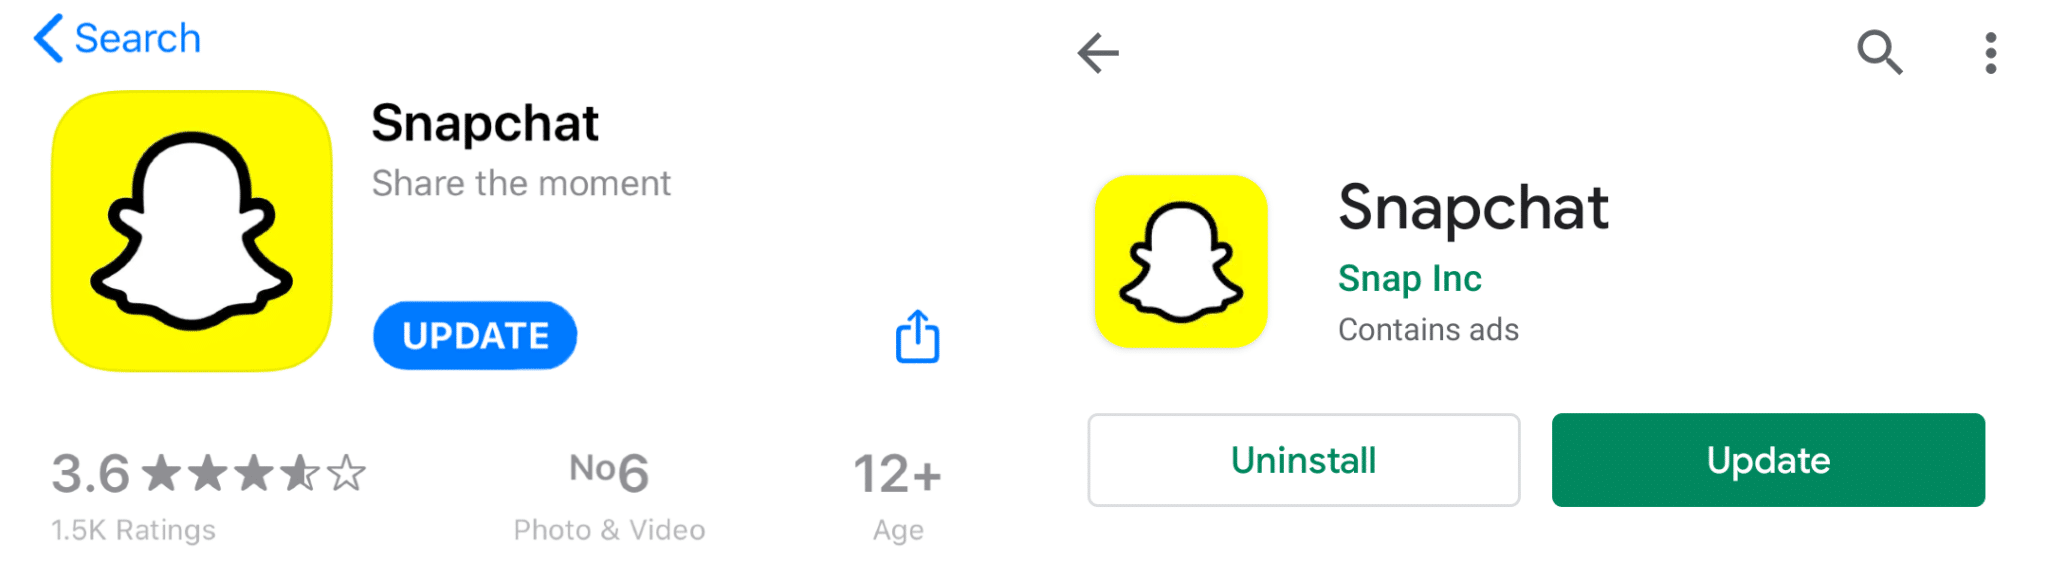 update Snapchat app on IOS/iPhone and Android to fix snapchat notifications not working